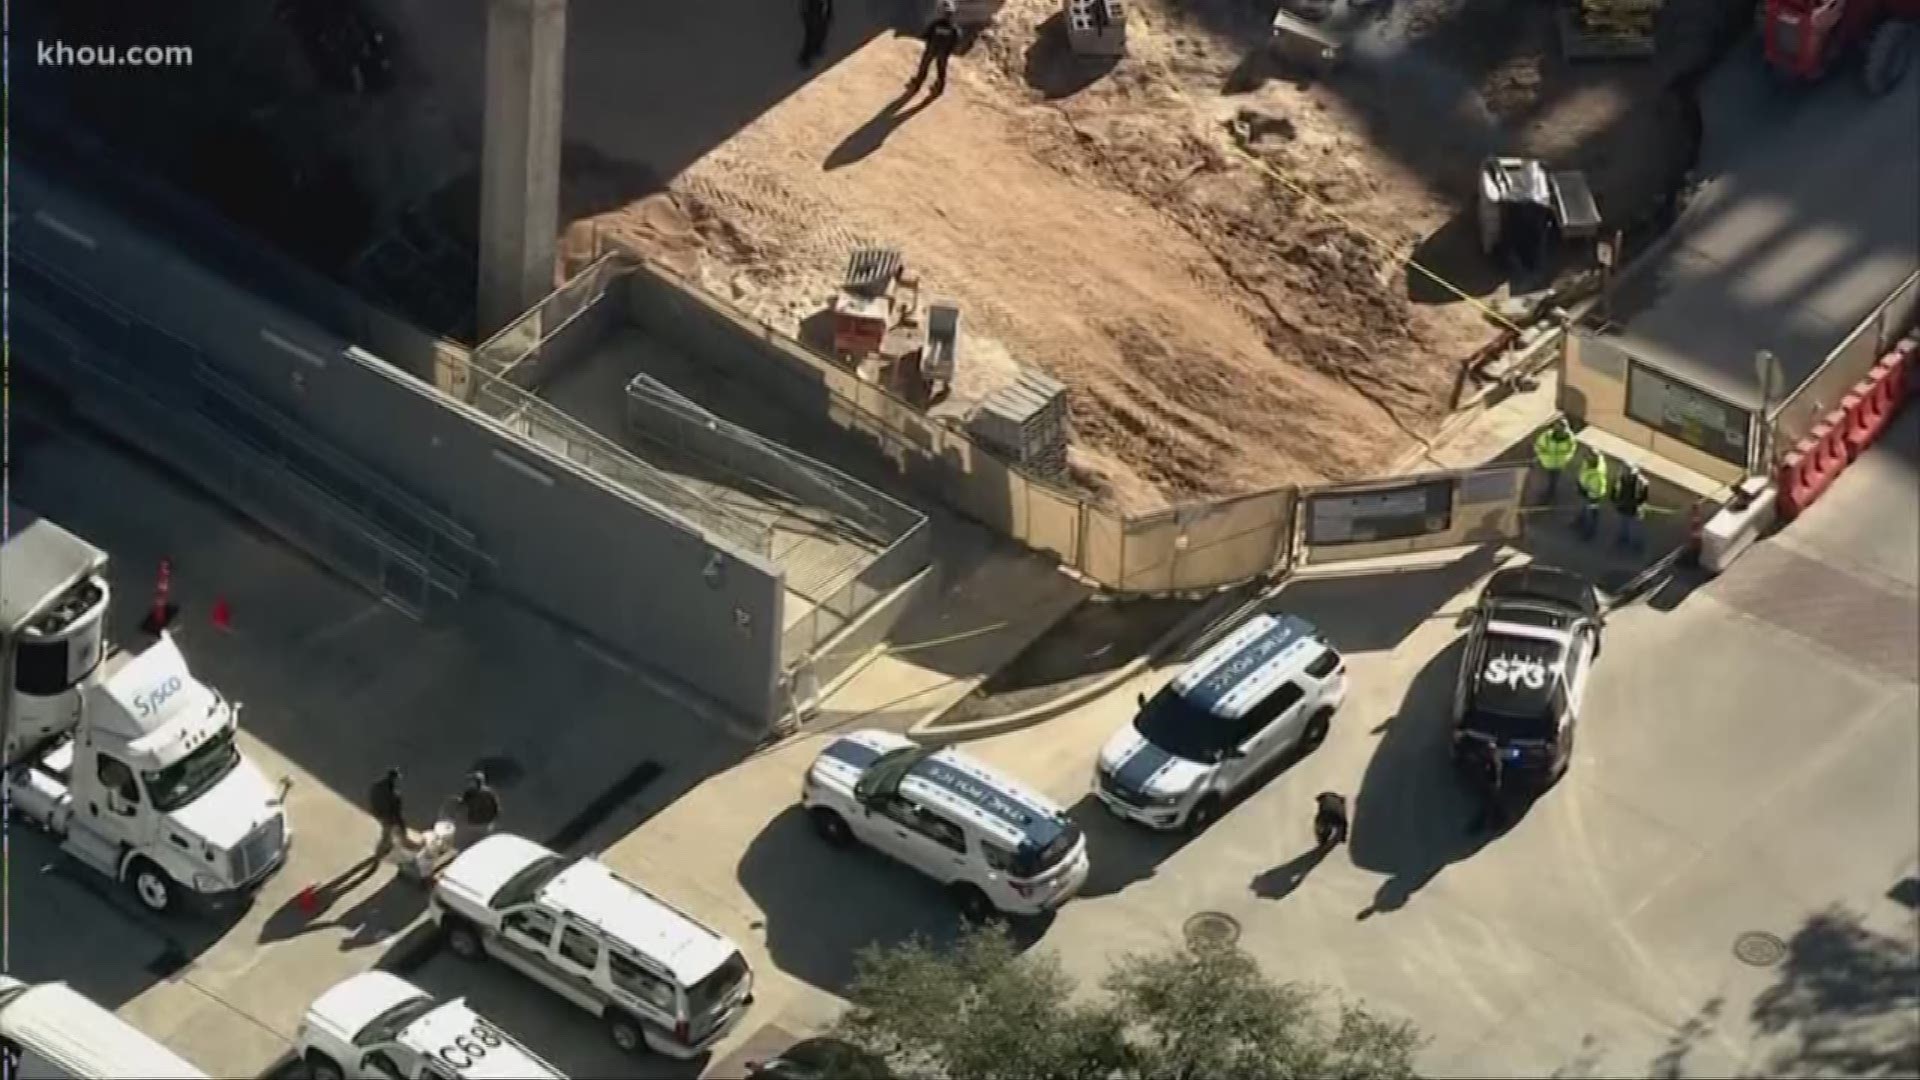 An elderly man's body was found outside Memorial Hermann Hospital in the Texas Medical Center early Monday. HPD Homicide detectives are investigating the death of the victim found at a closed-off construction site on the Memorial Hermann campus.